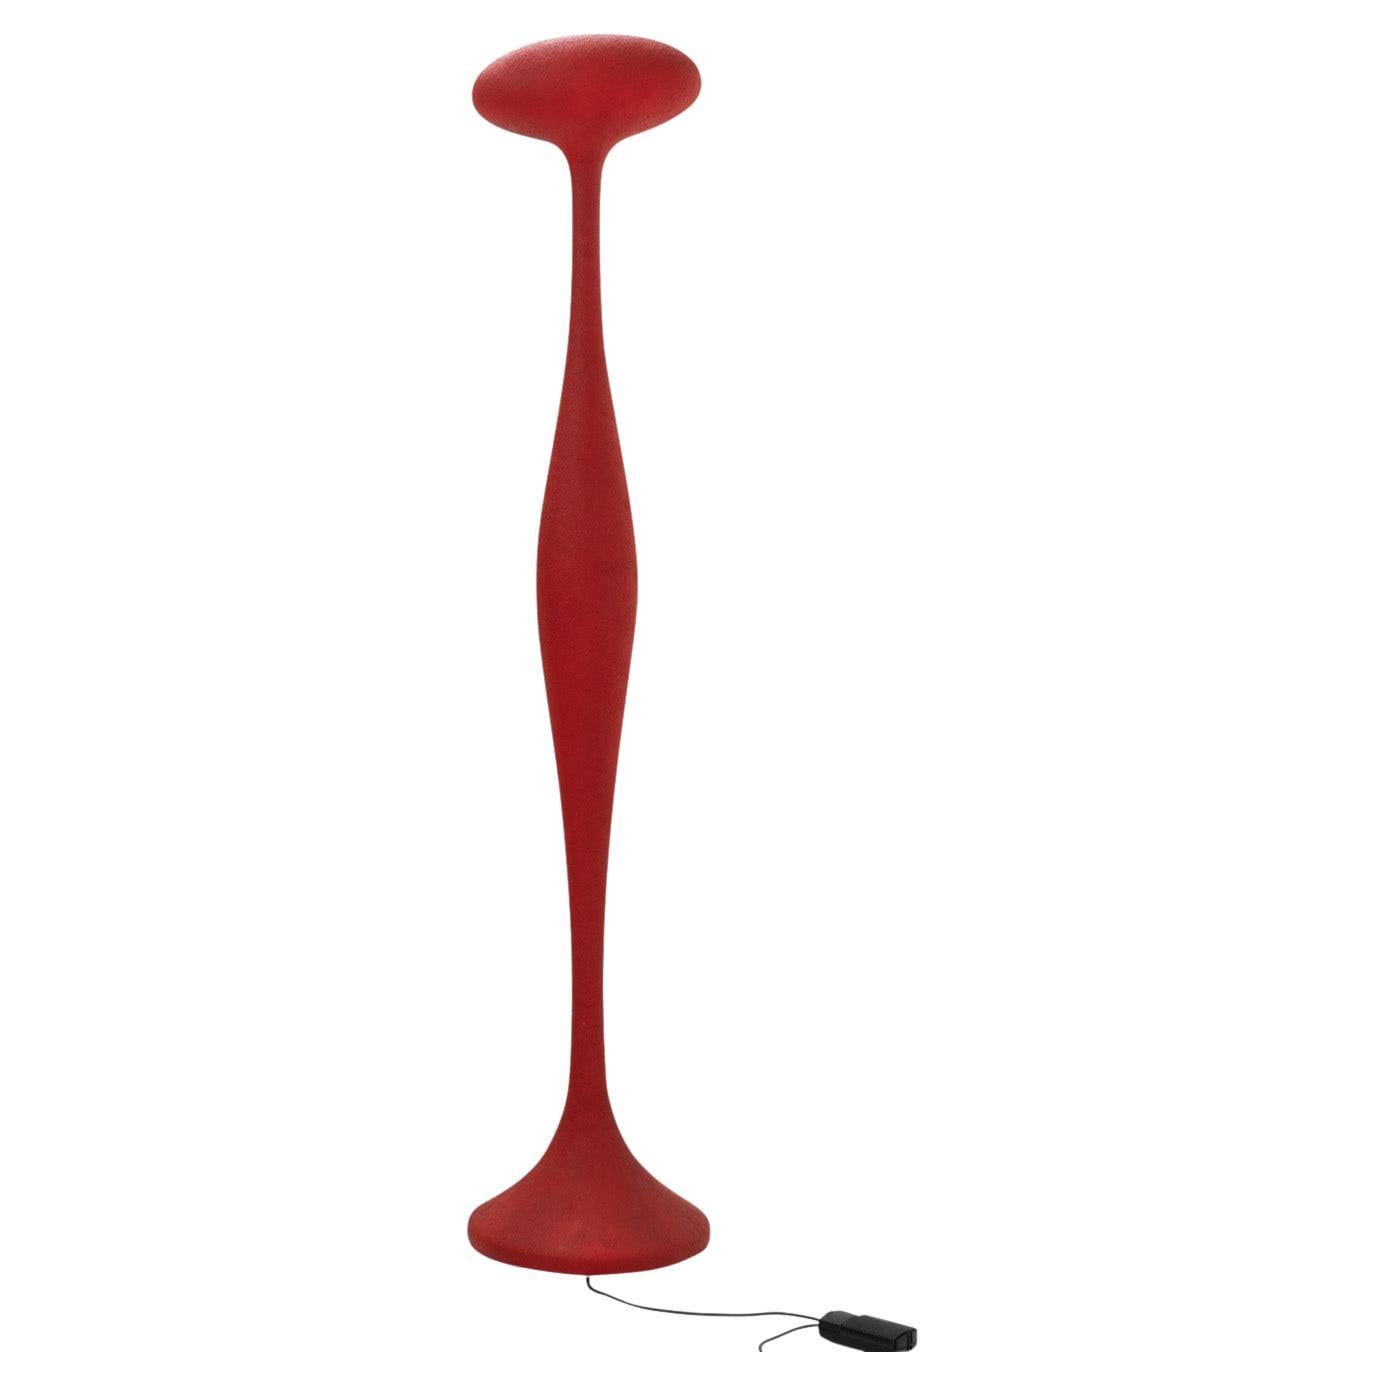 Organically Shaped E.T.A. Floor Lamp by Guglielmo Berchicci for Kundalini, 2000s For Sale